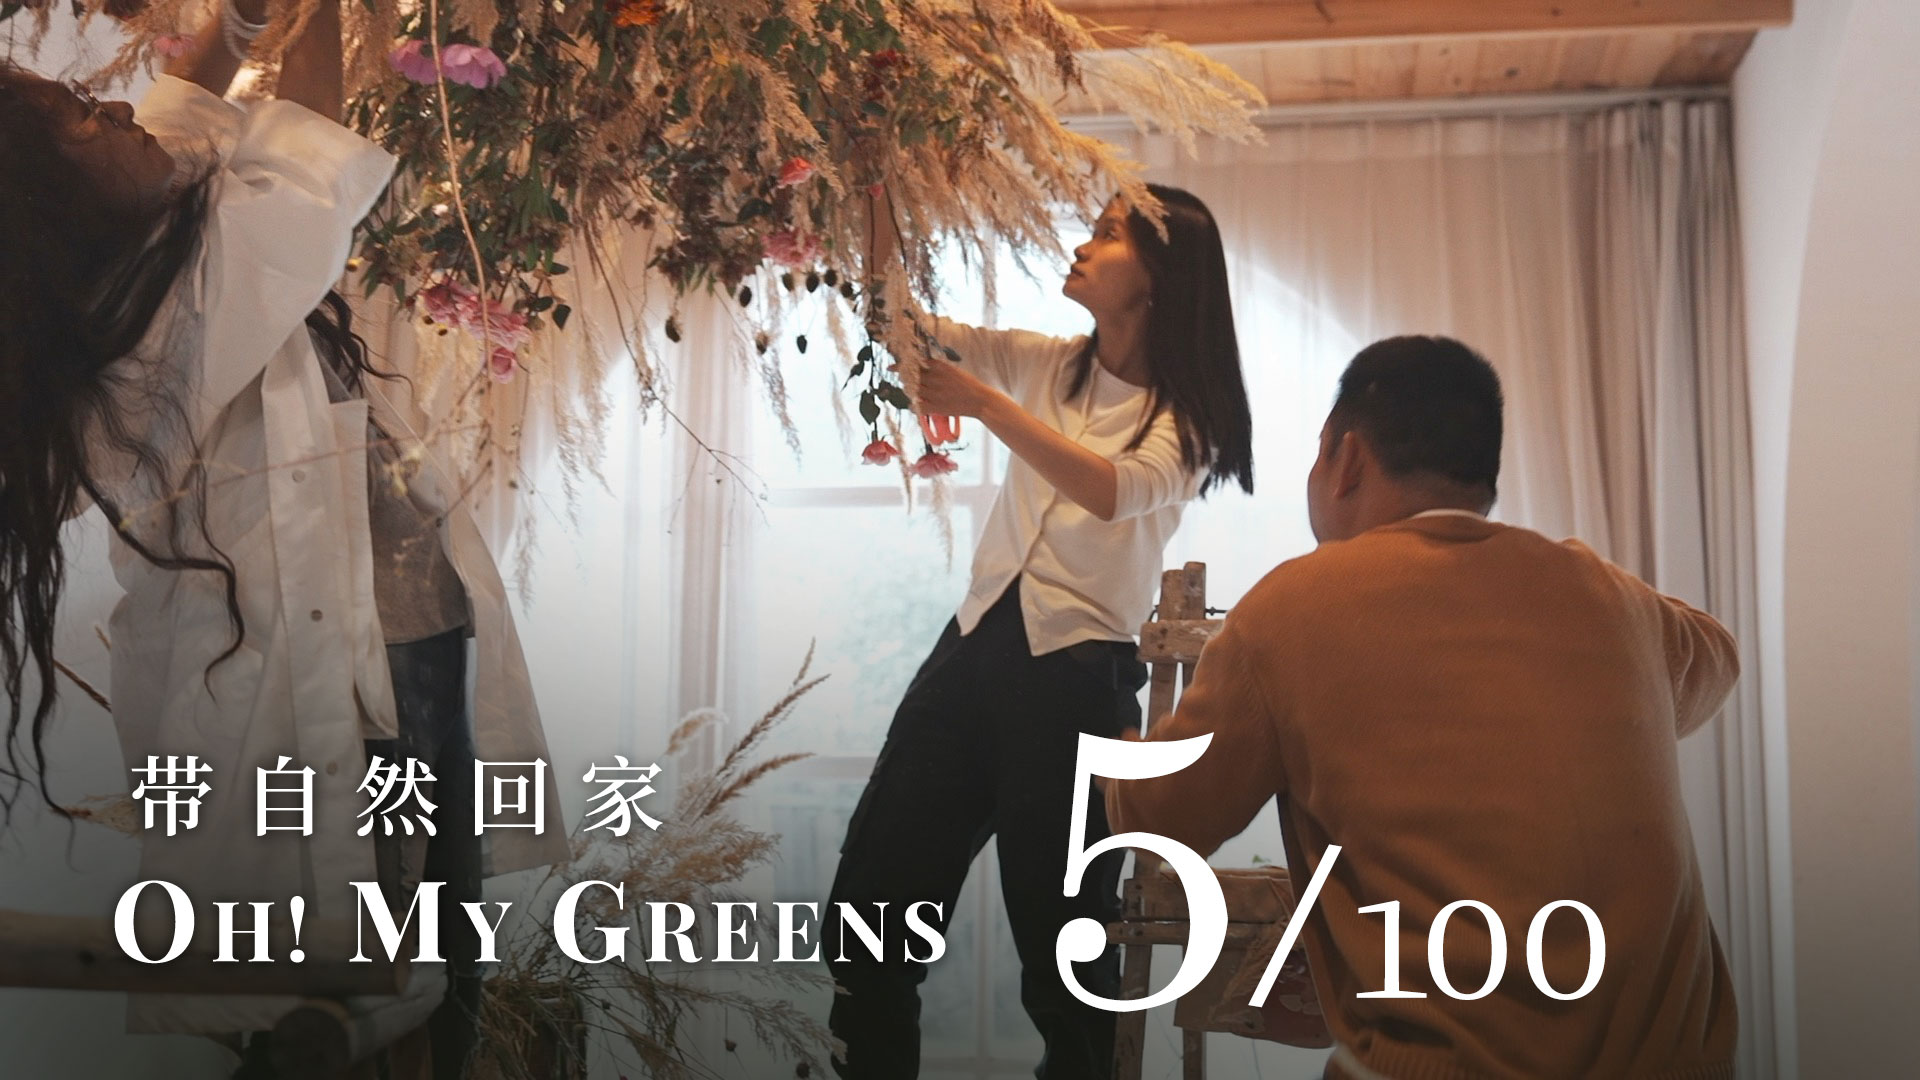 'Oh! My Greens' Ep. 5: Collecting plants from mountain to make artwork